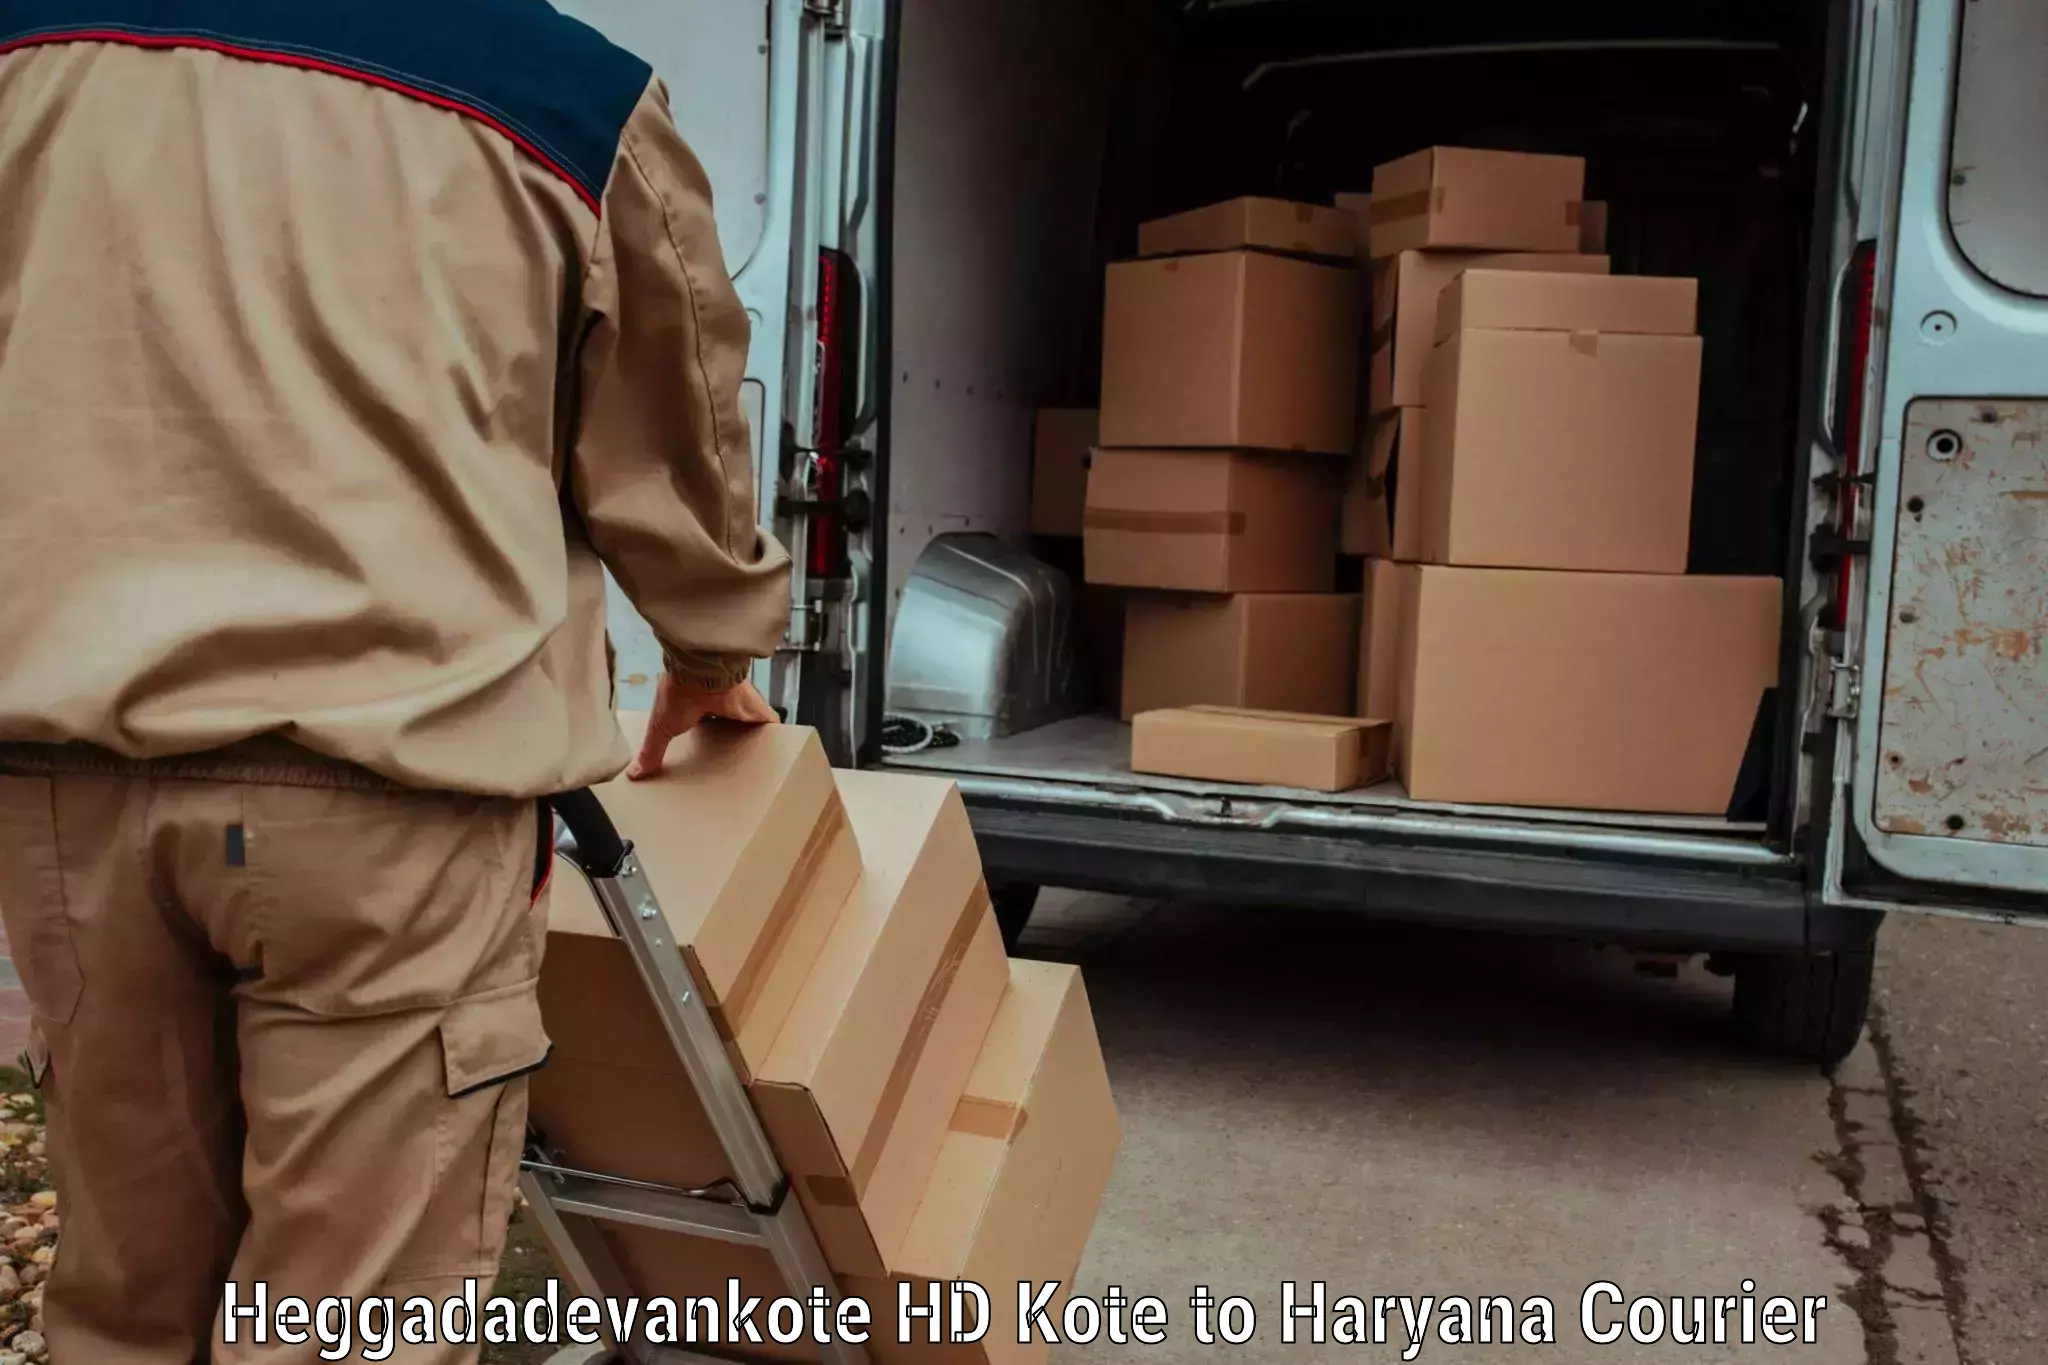 Easy access courier services in Heggadadevankote HD Kote to Palwal